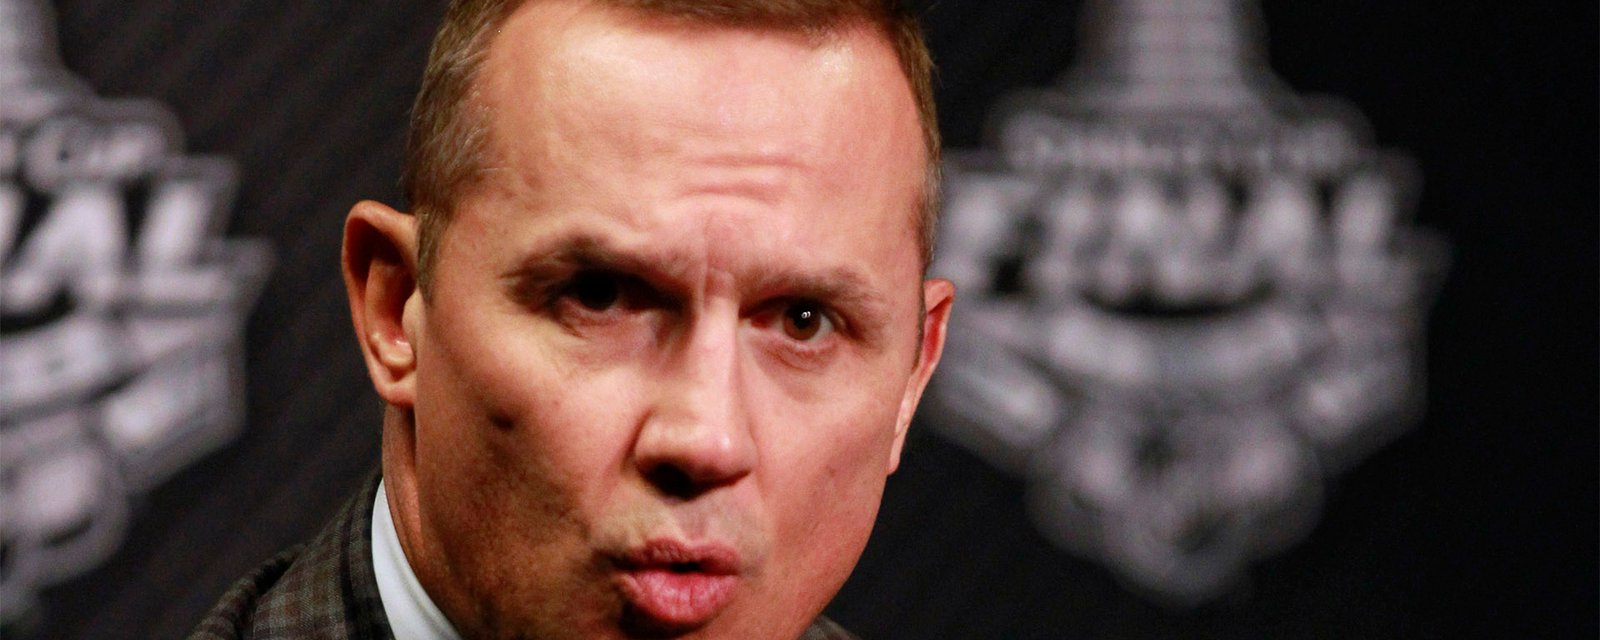 Steve Yzerman takes a jab at the Coyotes over cheating allegations.